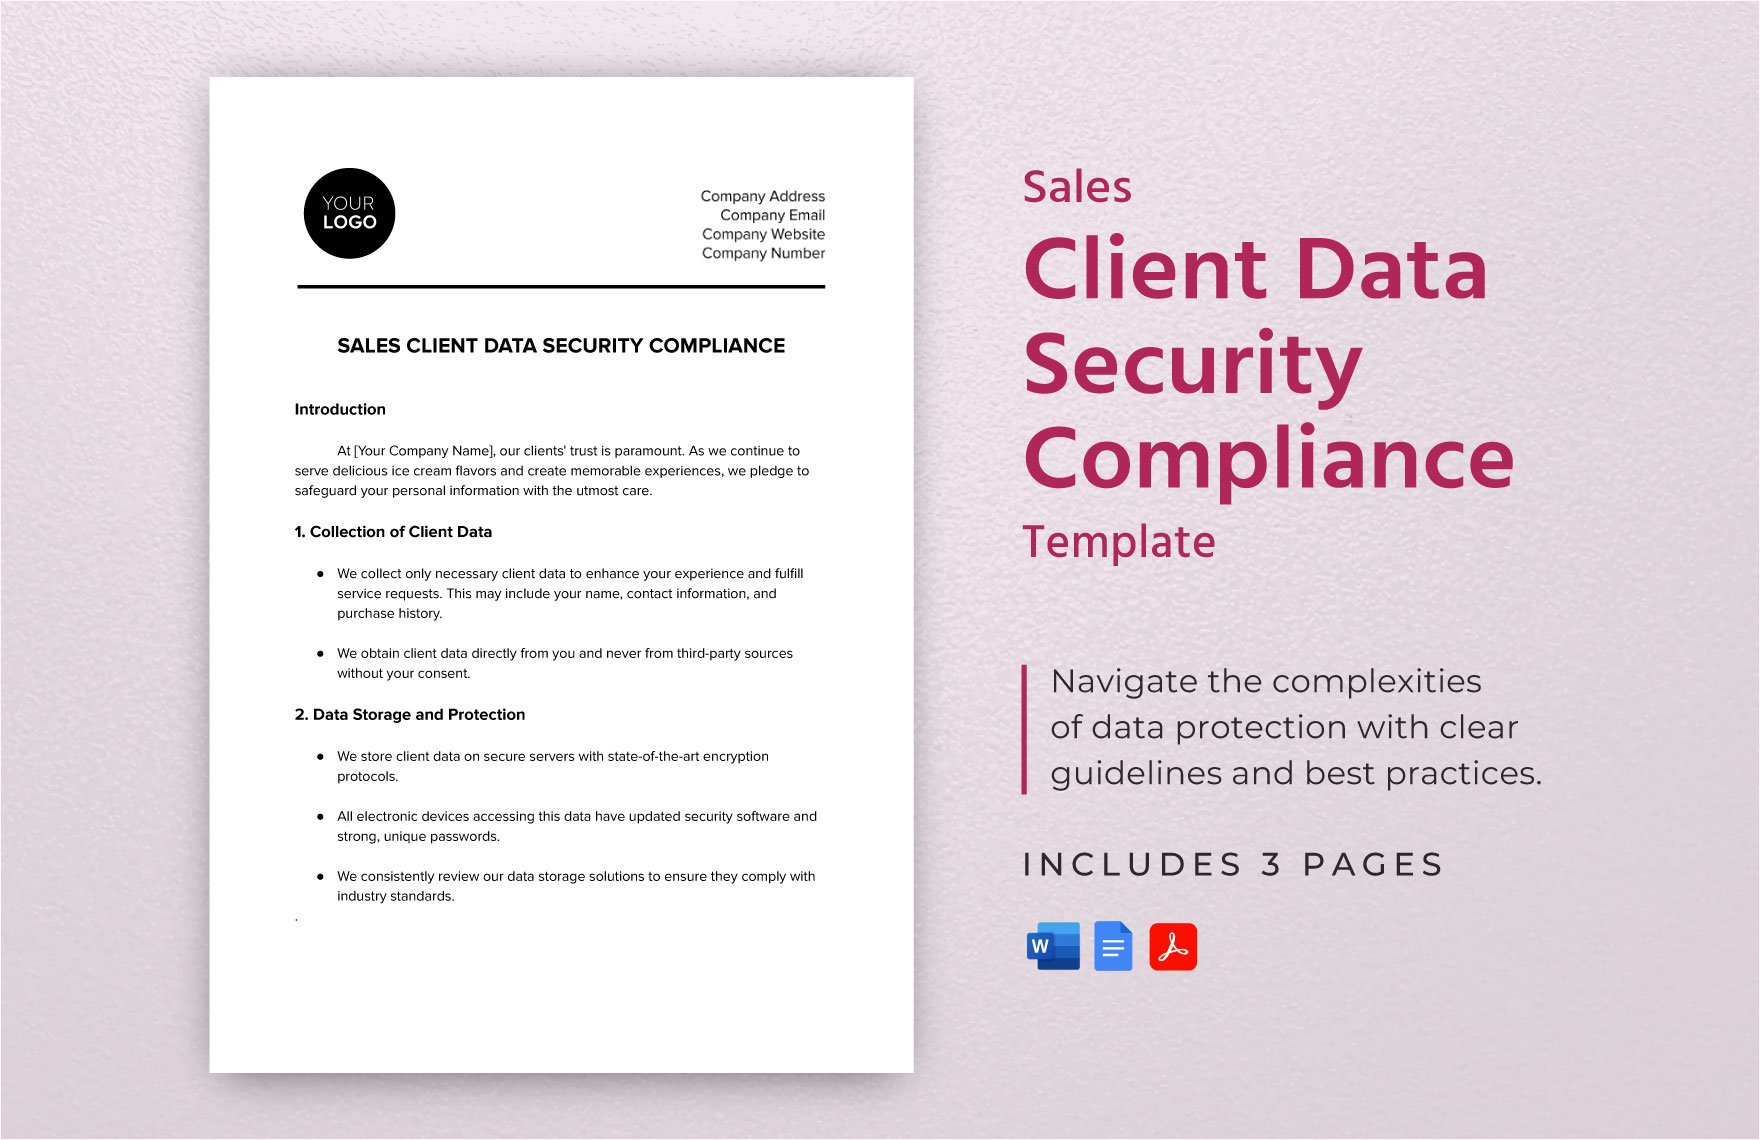 Sales Client Data Security Compliance Template